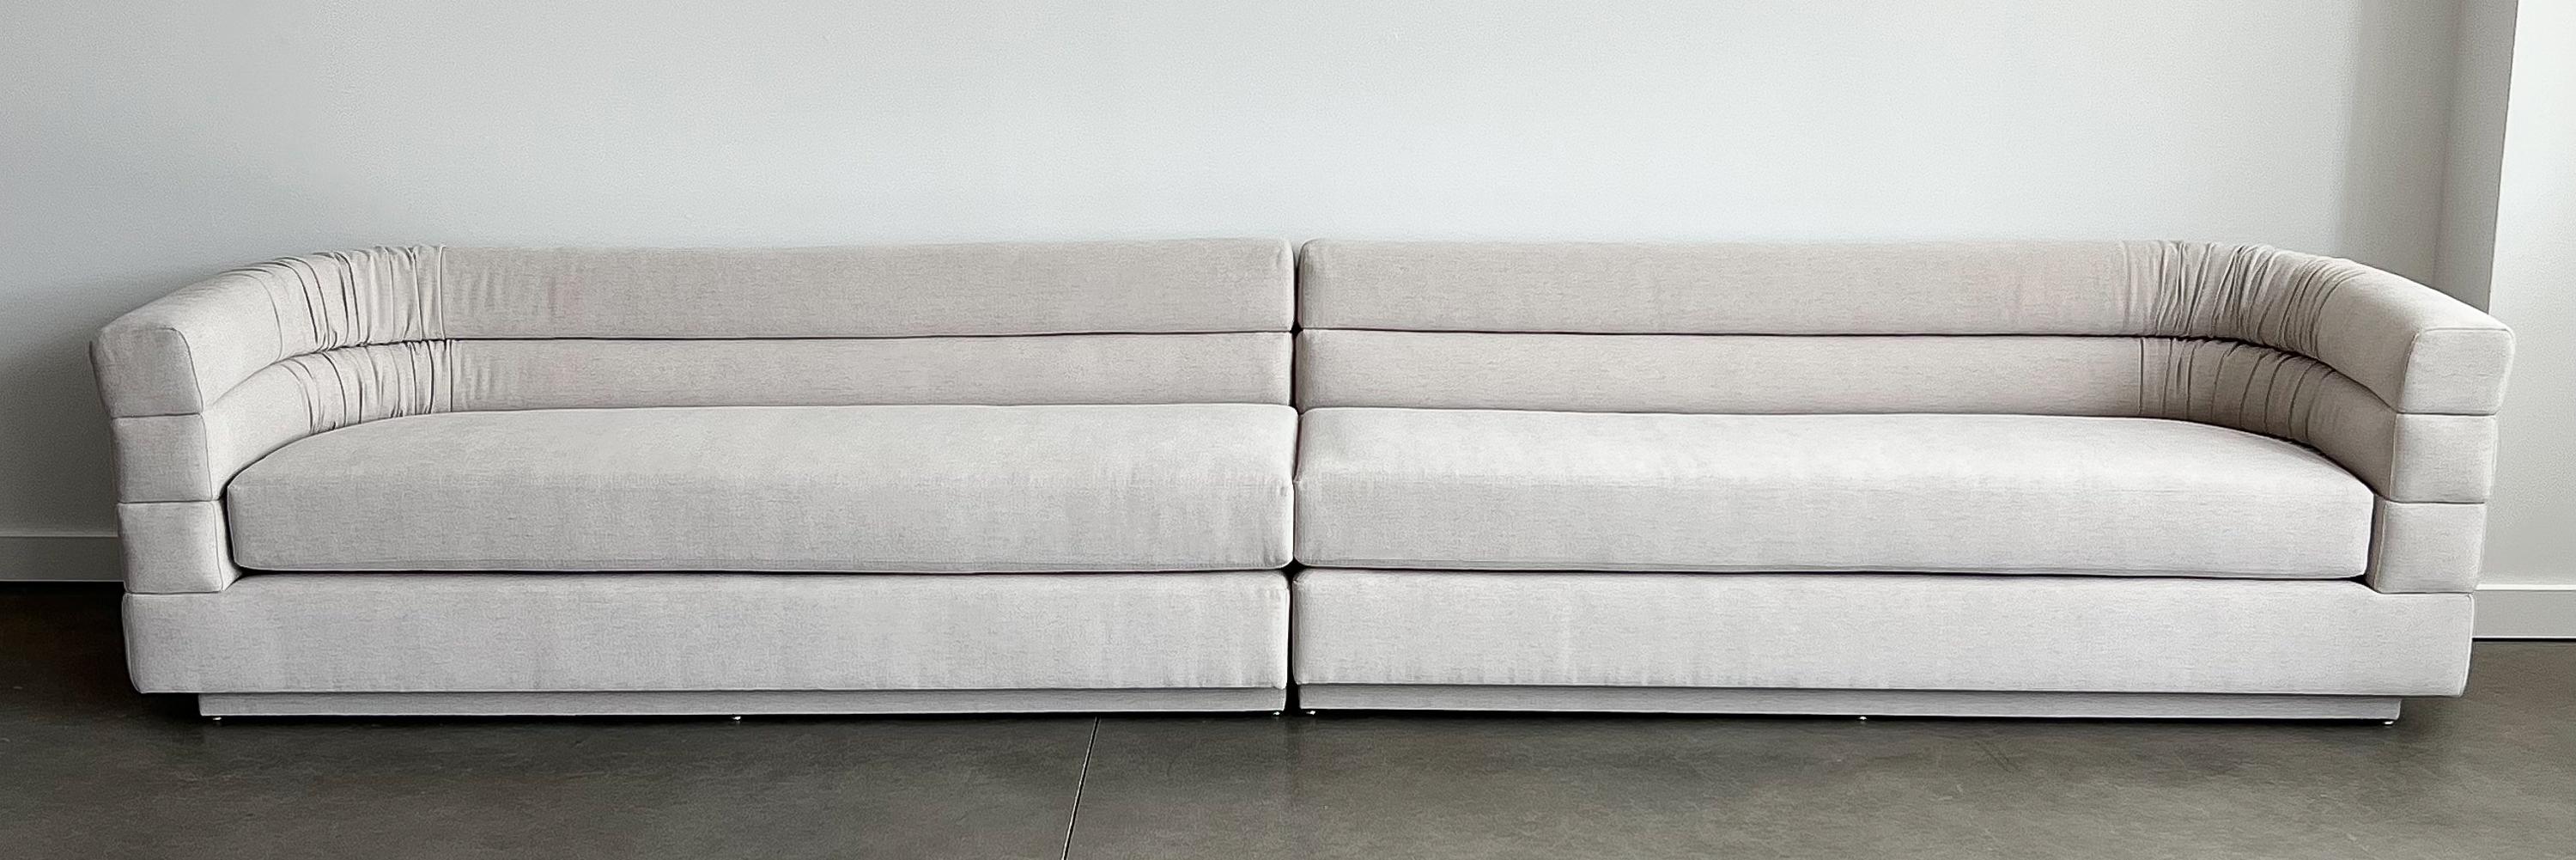 American Interior Crafts Channeled Back Two Piece Sofa by Richard Himmel